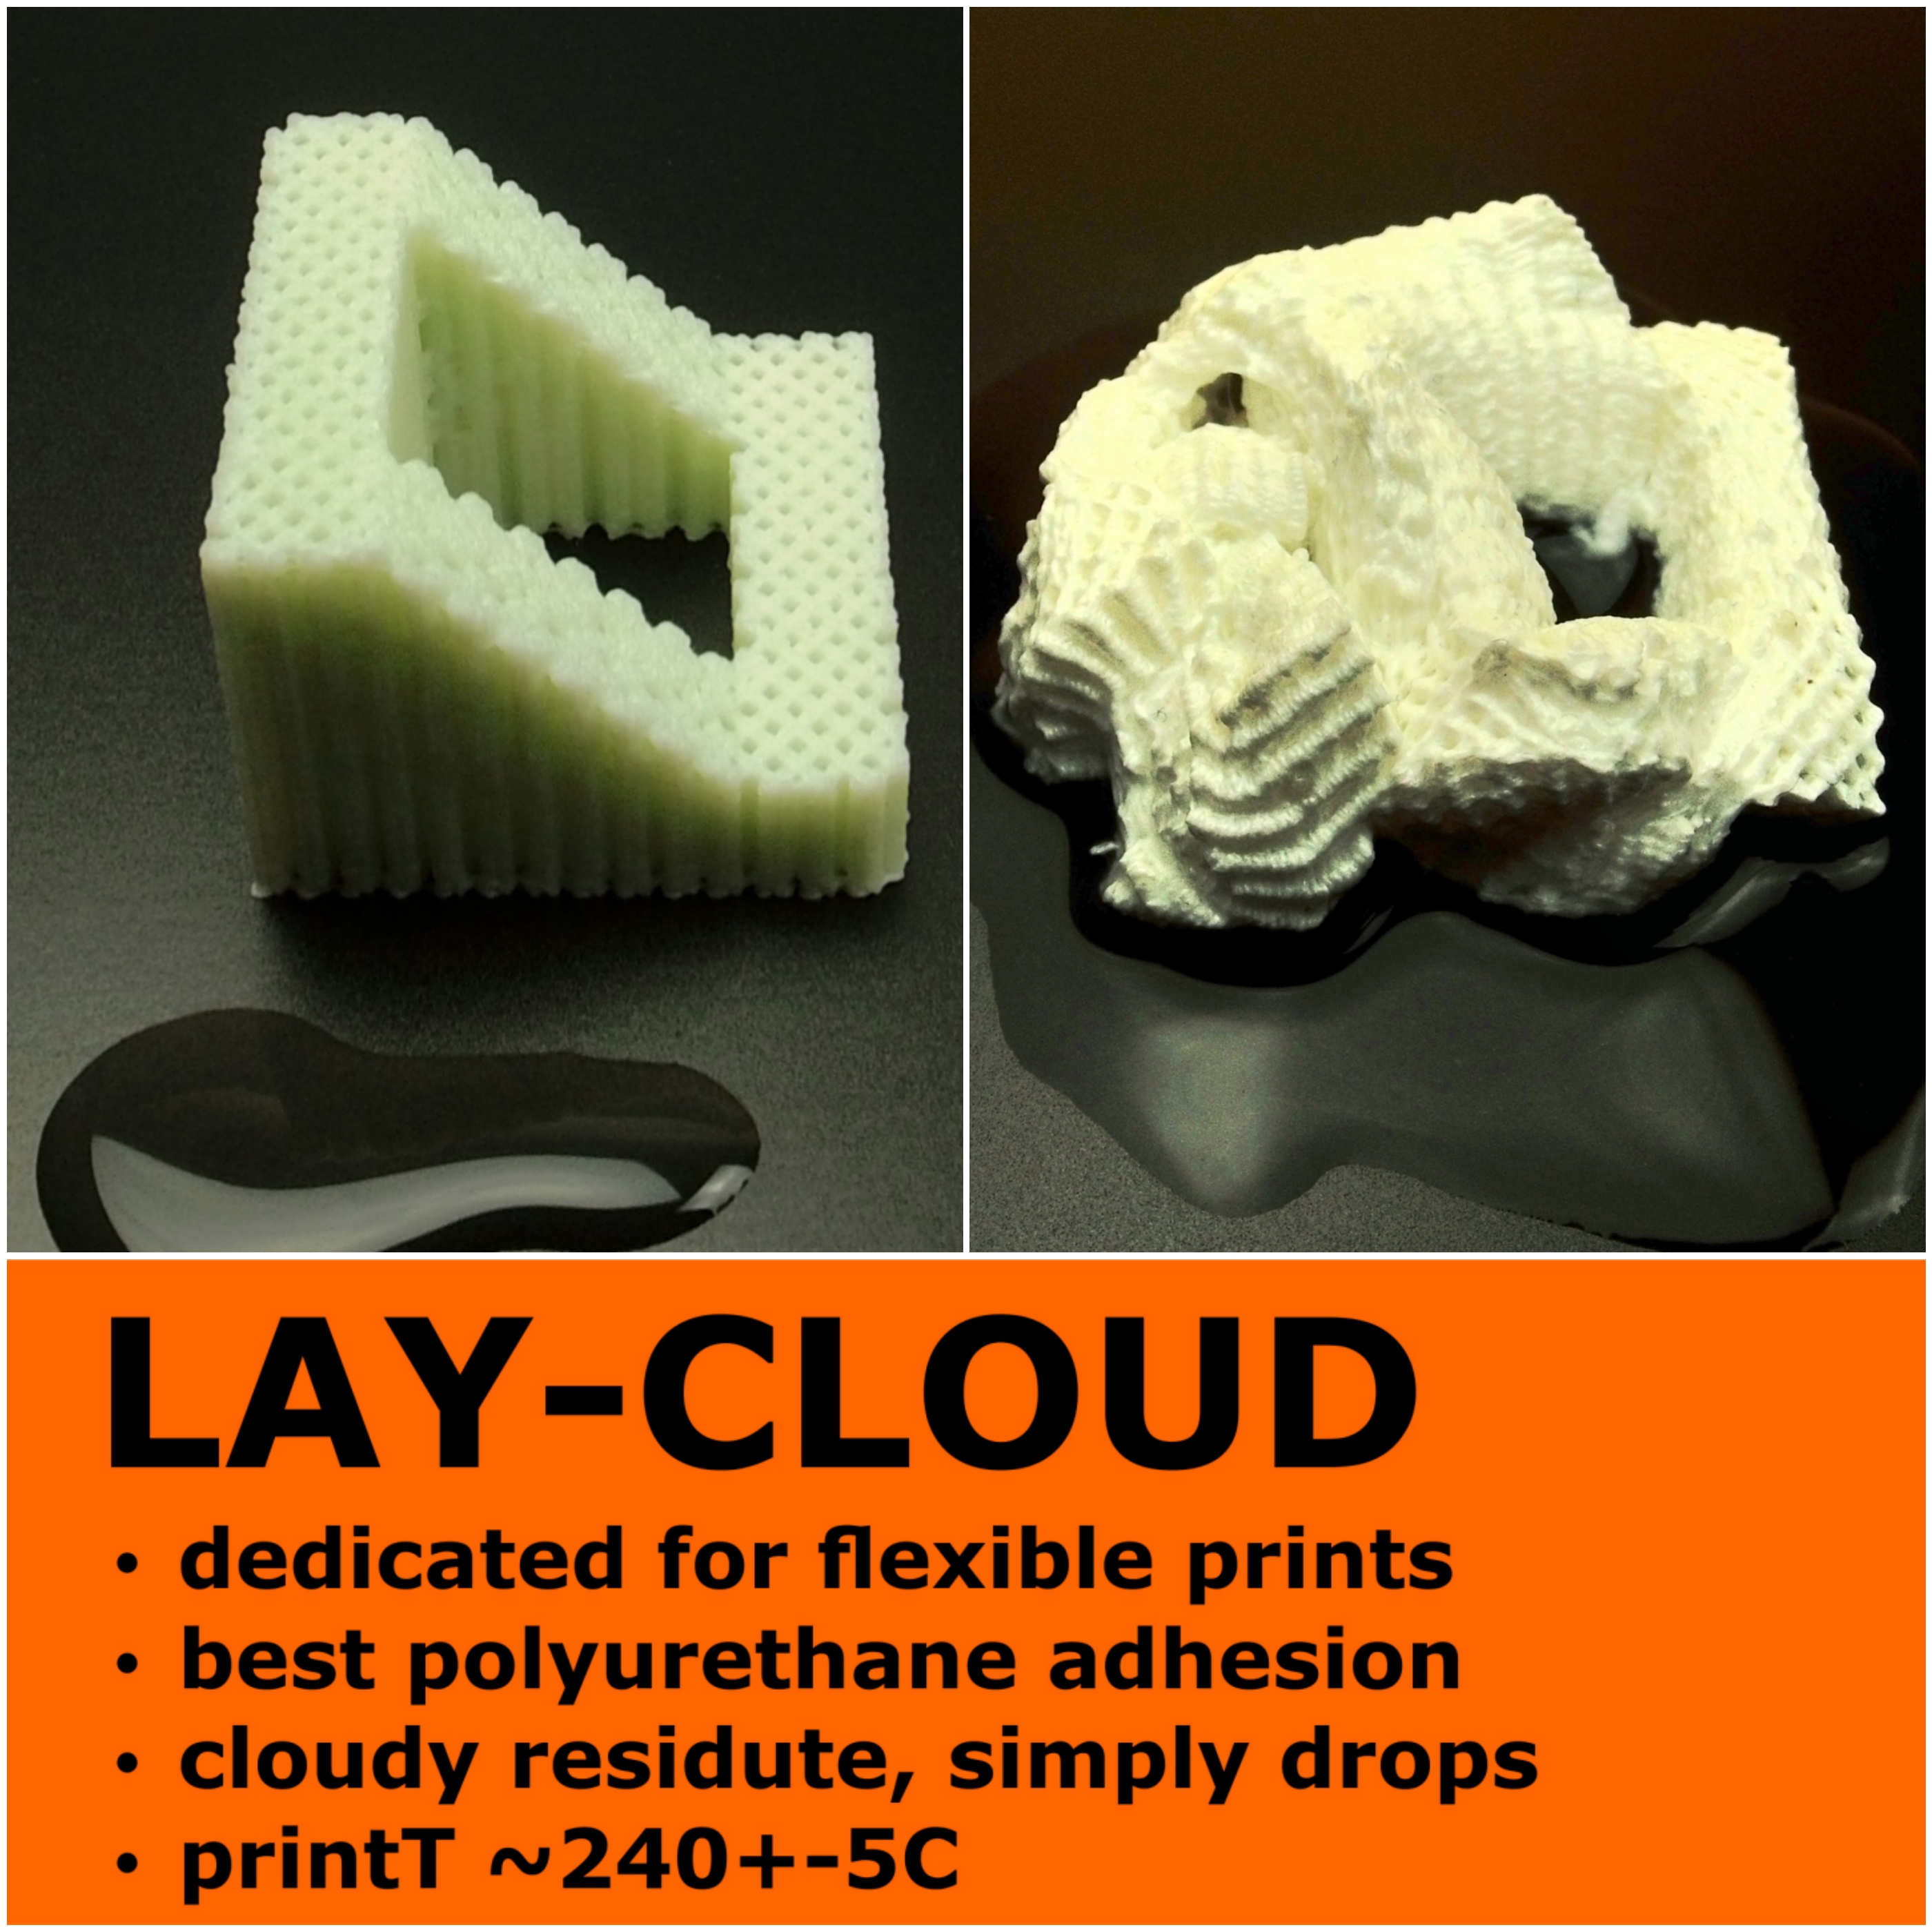 layaway-cloud_filament_support_structures_kai_parthy